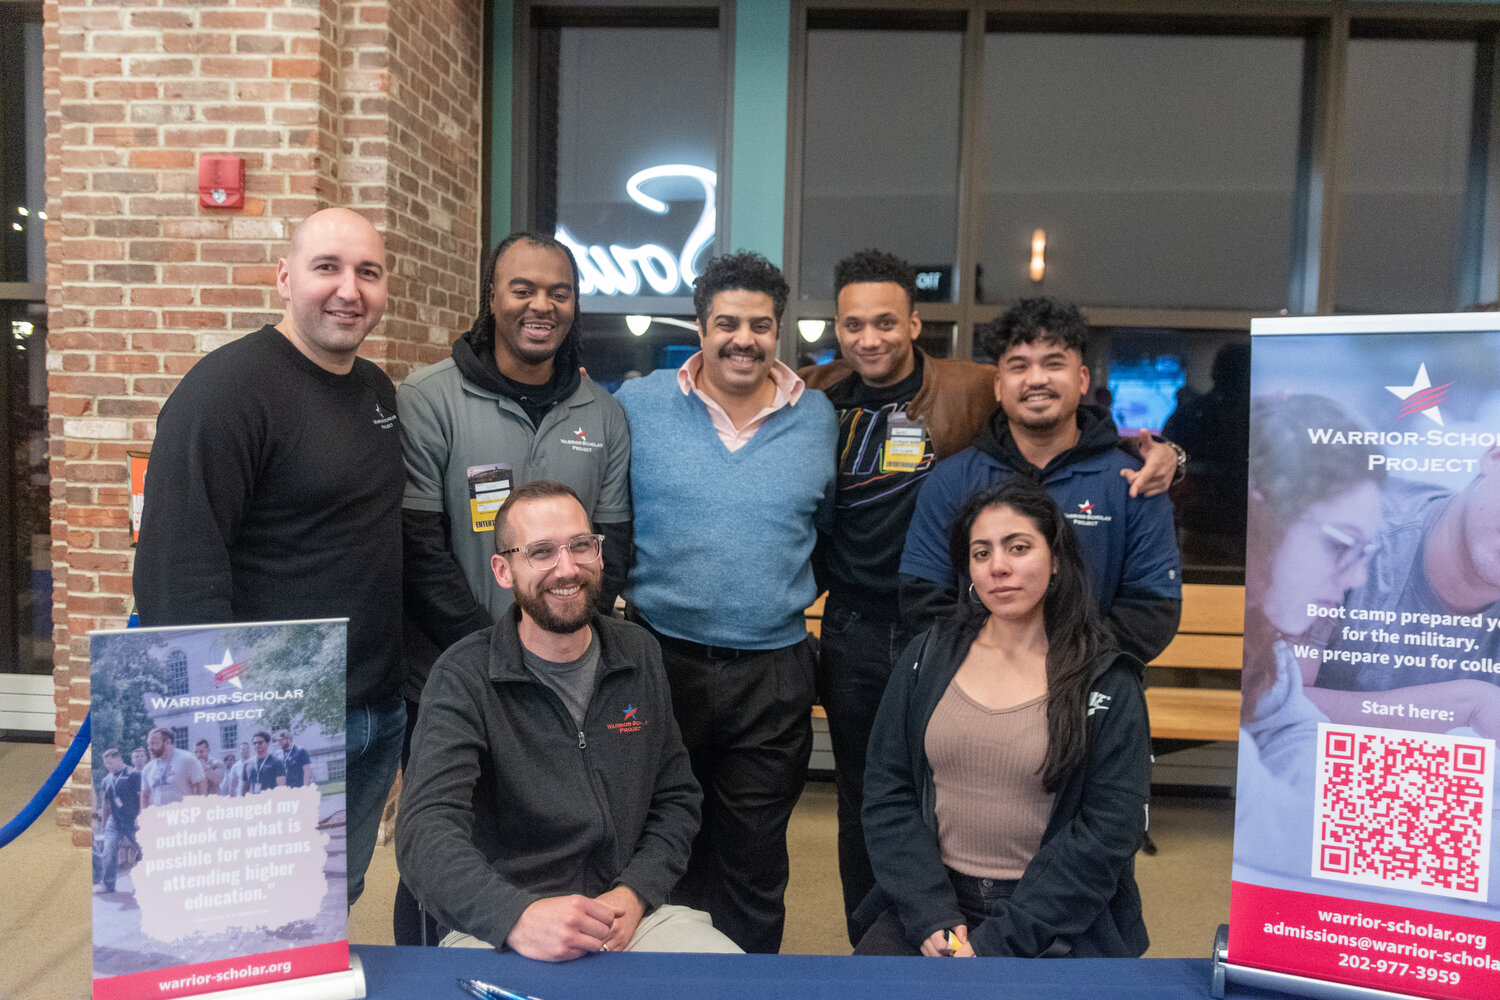 Members of the Warrior-Scholar Project team came out to talk to the community during the New York Islanders military appreciation night last weekend. The organization helps empower veterans in their pursuit of higher education.